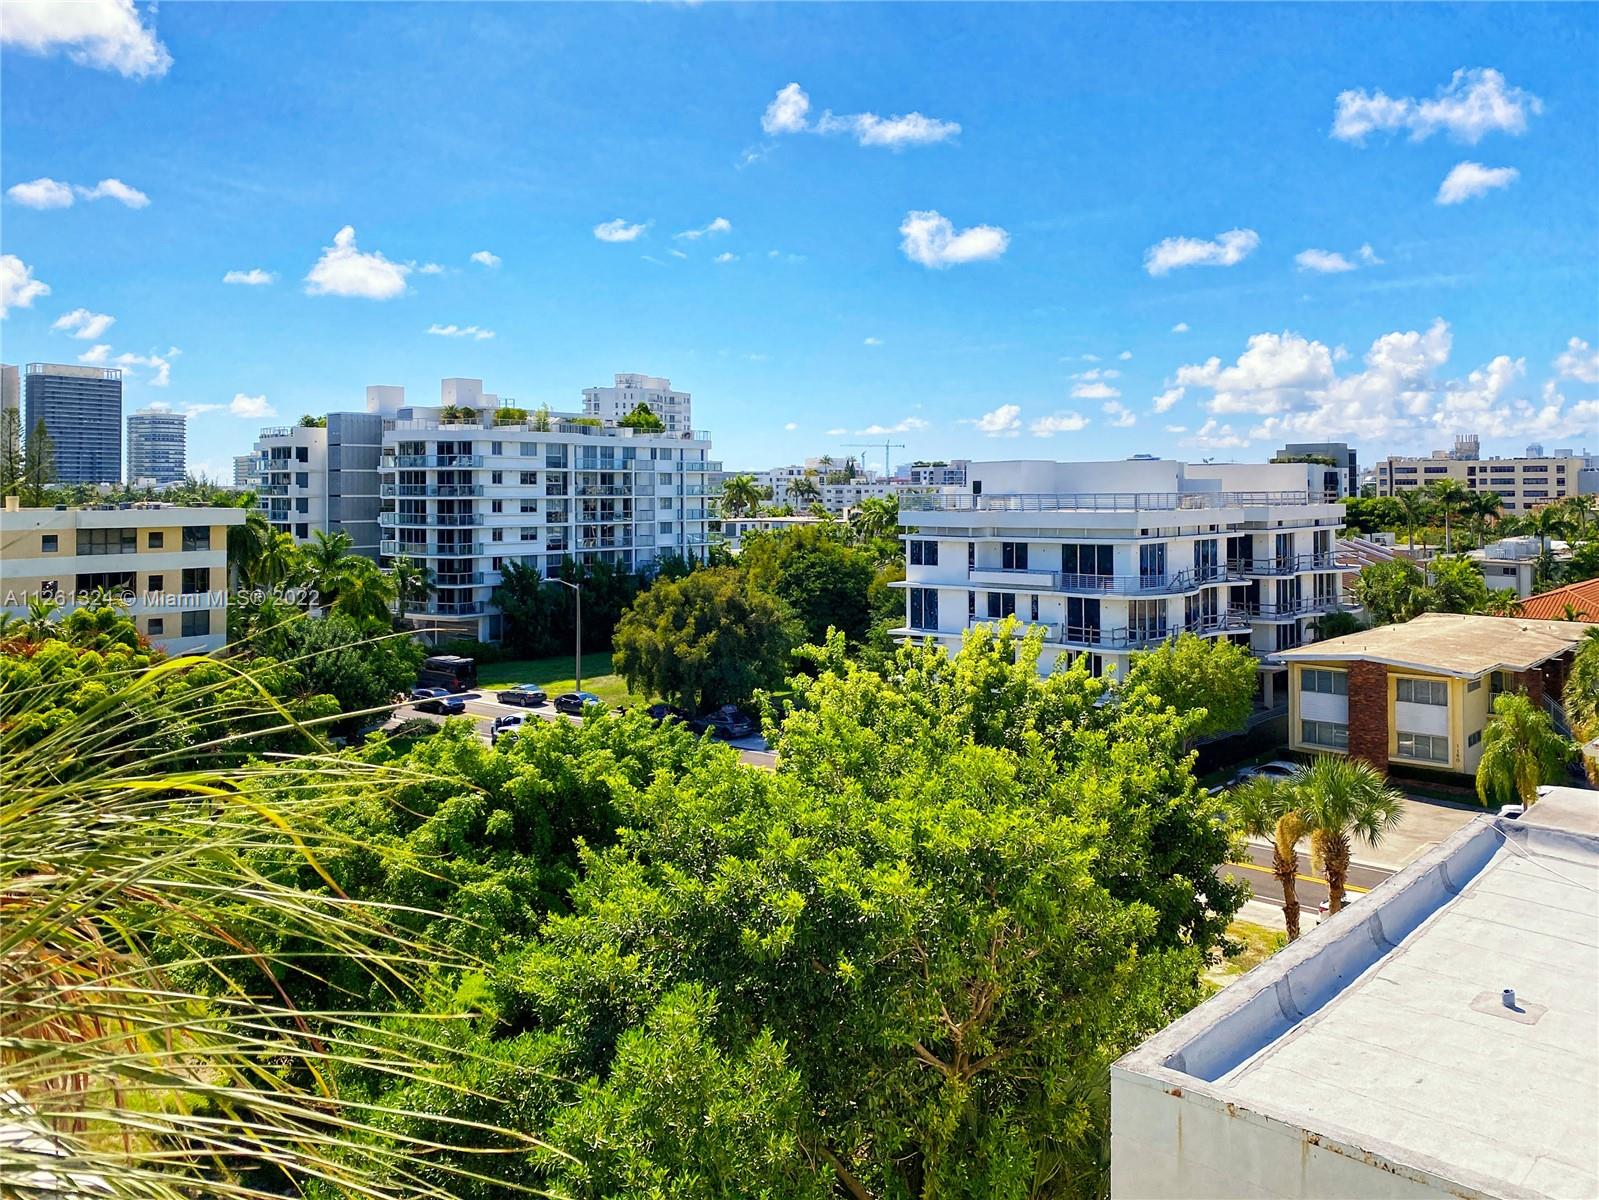 Beautiful unit in the heart of Bay Harbor. It has a 567 sq. ft wraparound balcony, perfect lay out, ItalKraft cabinetry, Stainless steal Wolf appliances, Sub-zero Refrigerator, Washer and Dryer. 2 Parking Spaces. Five minutes from the Bal Harbour mall.